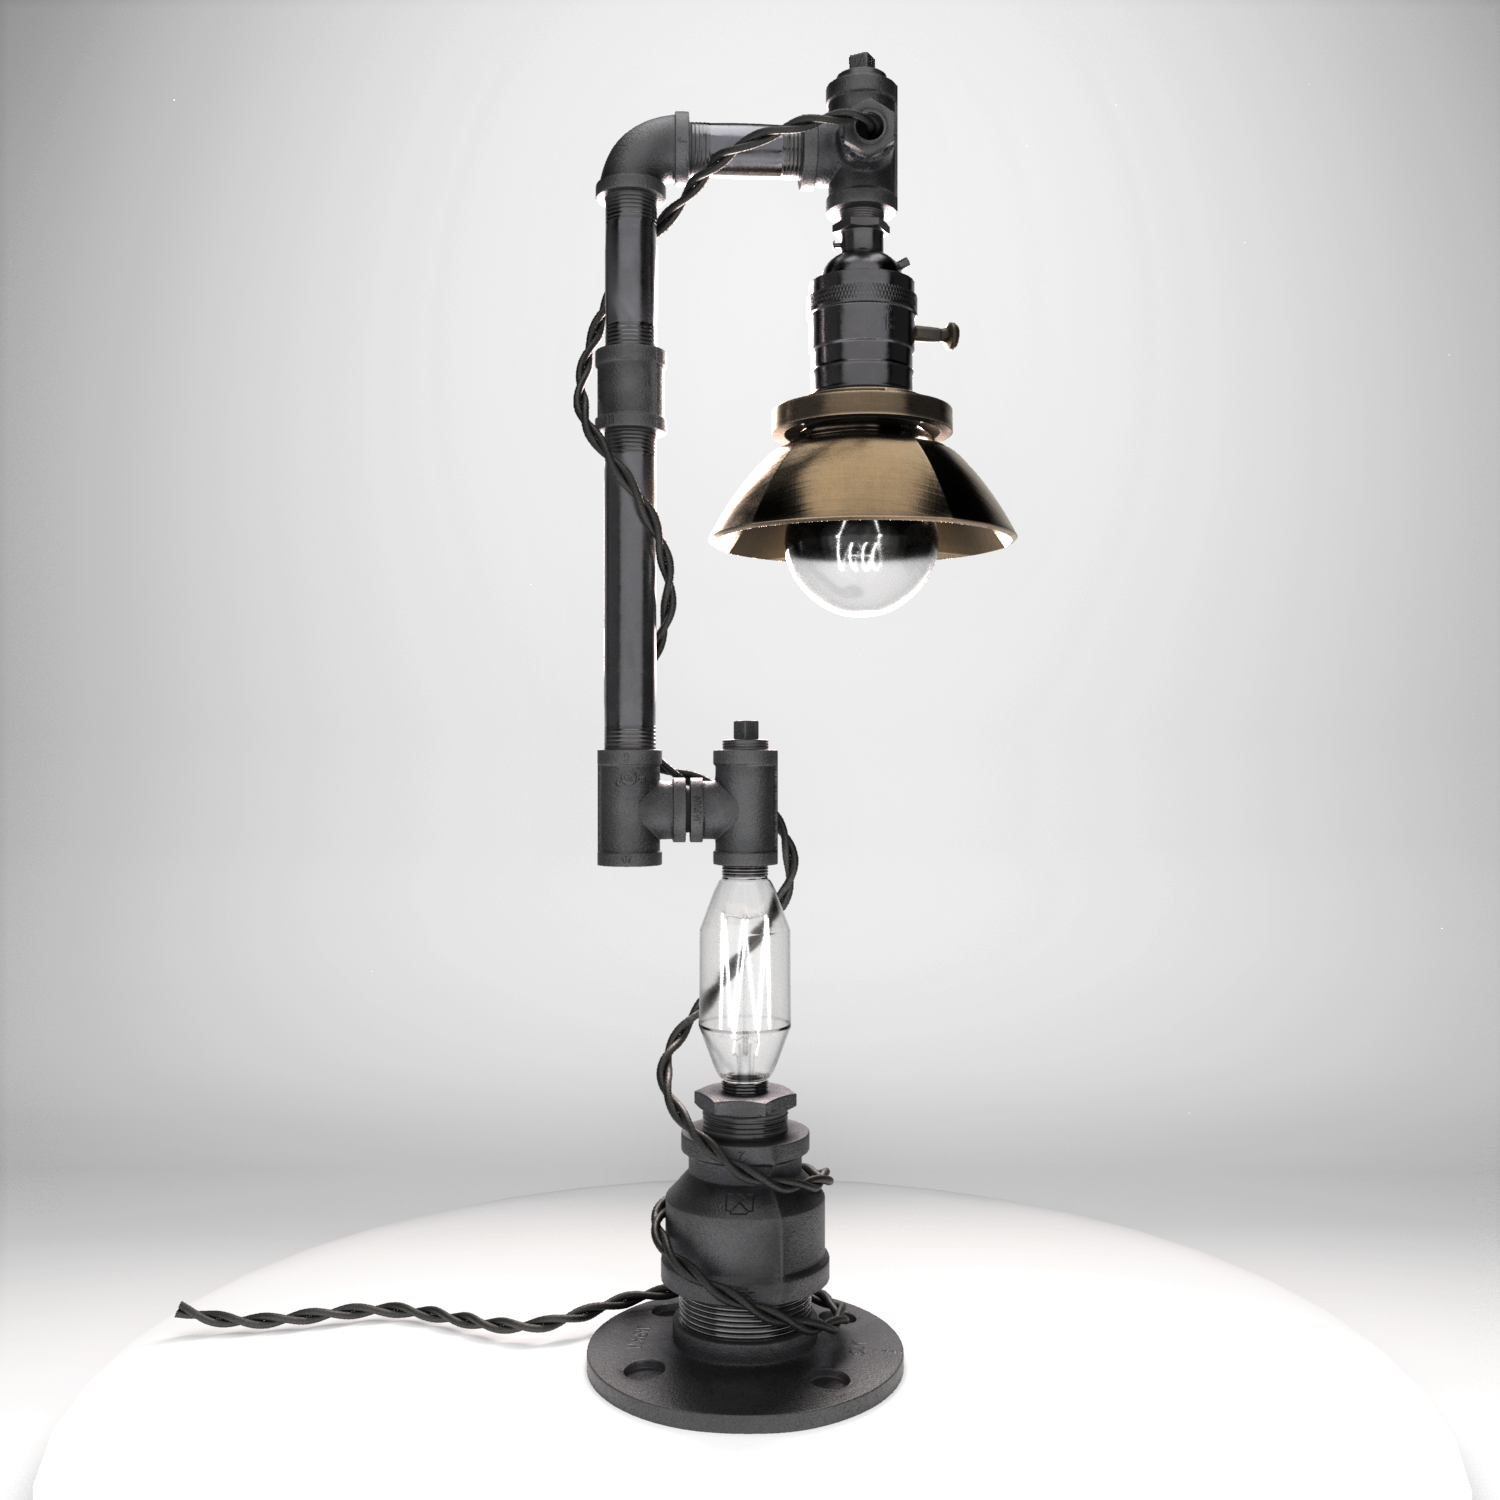 3D model of an industrial- style lamp made from pipes.